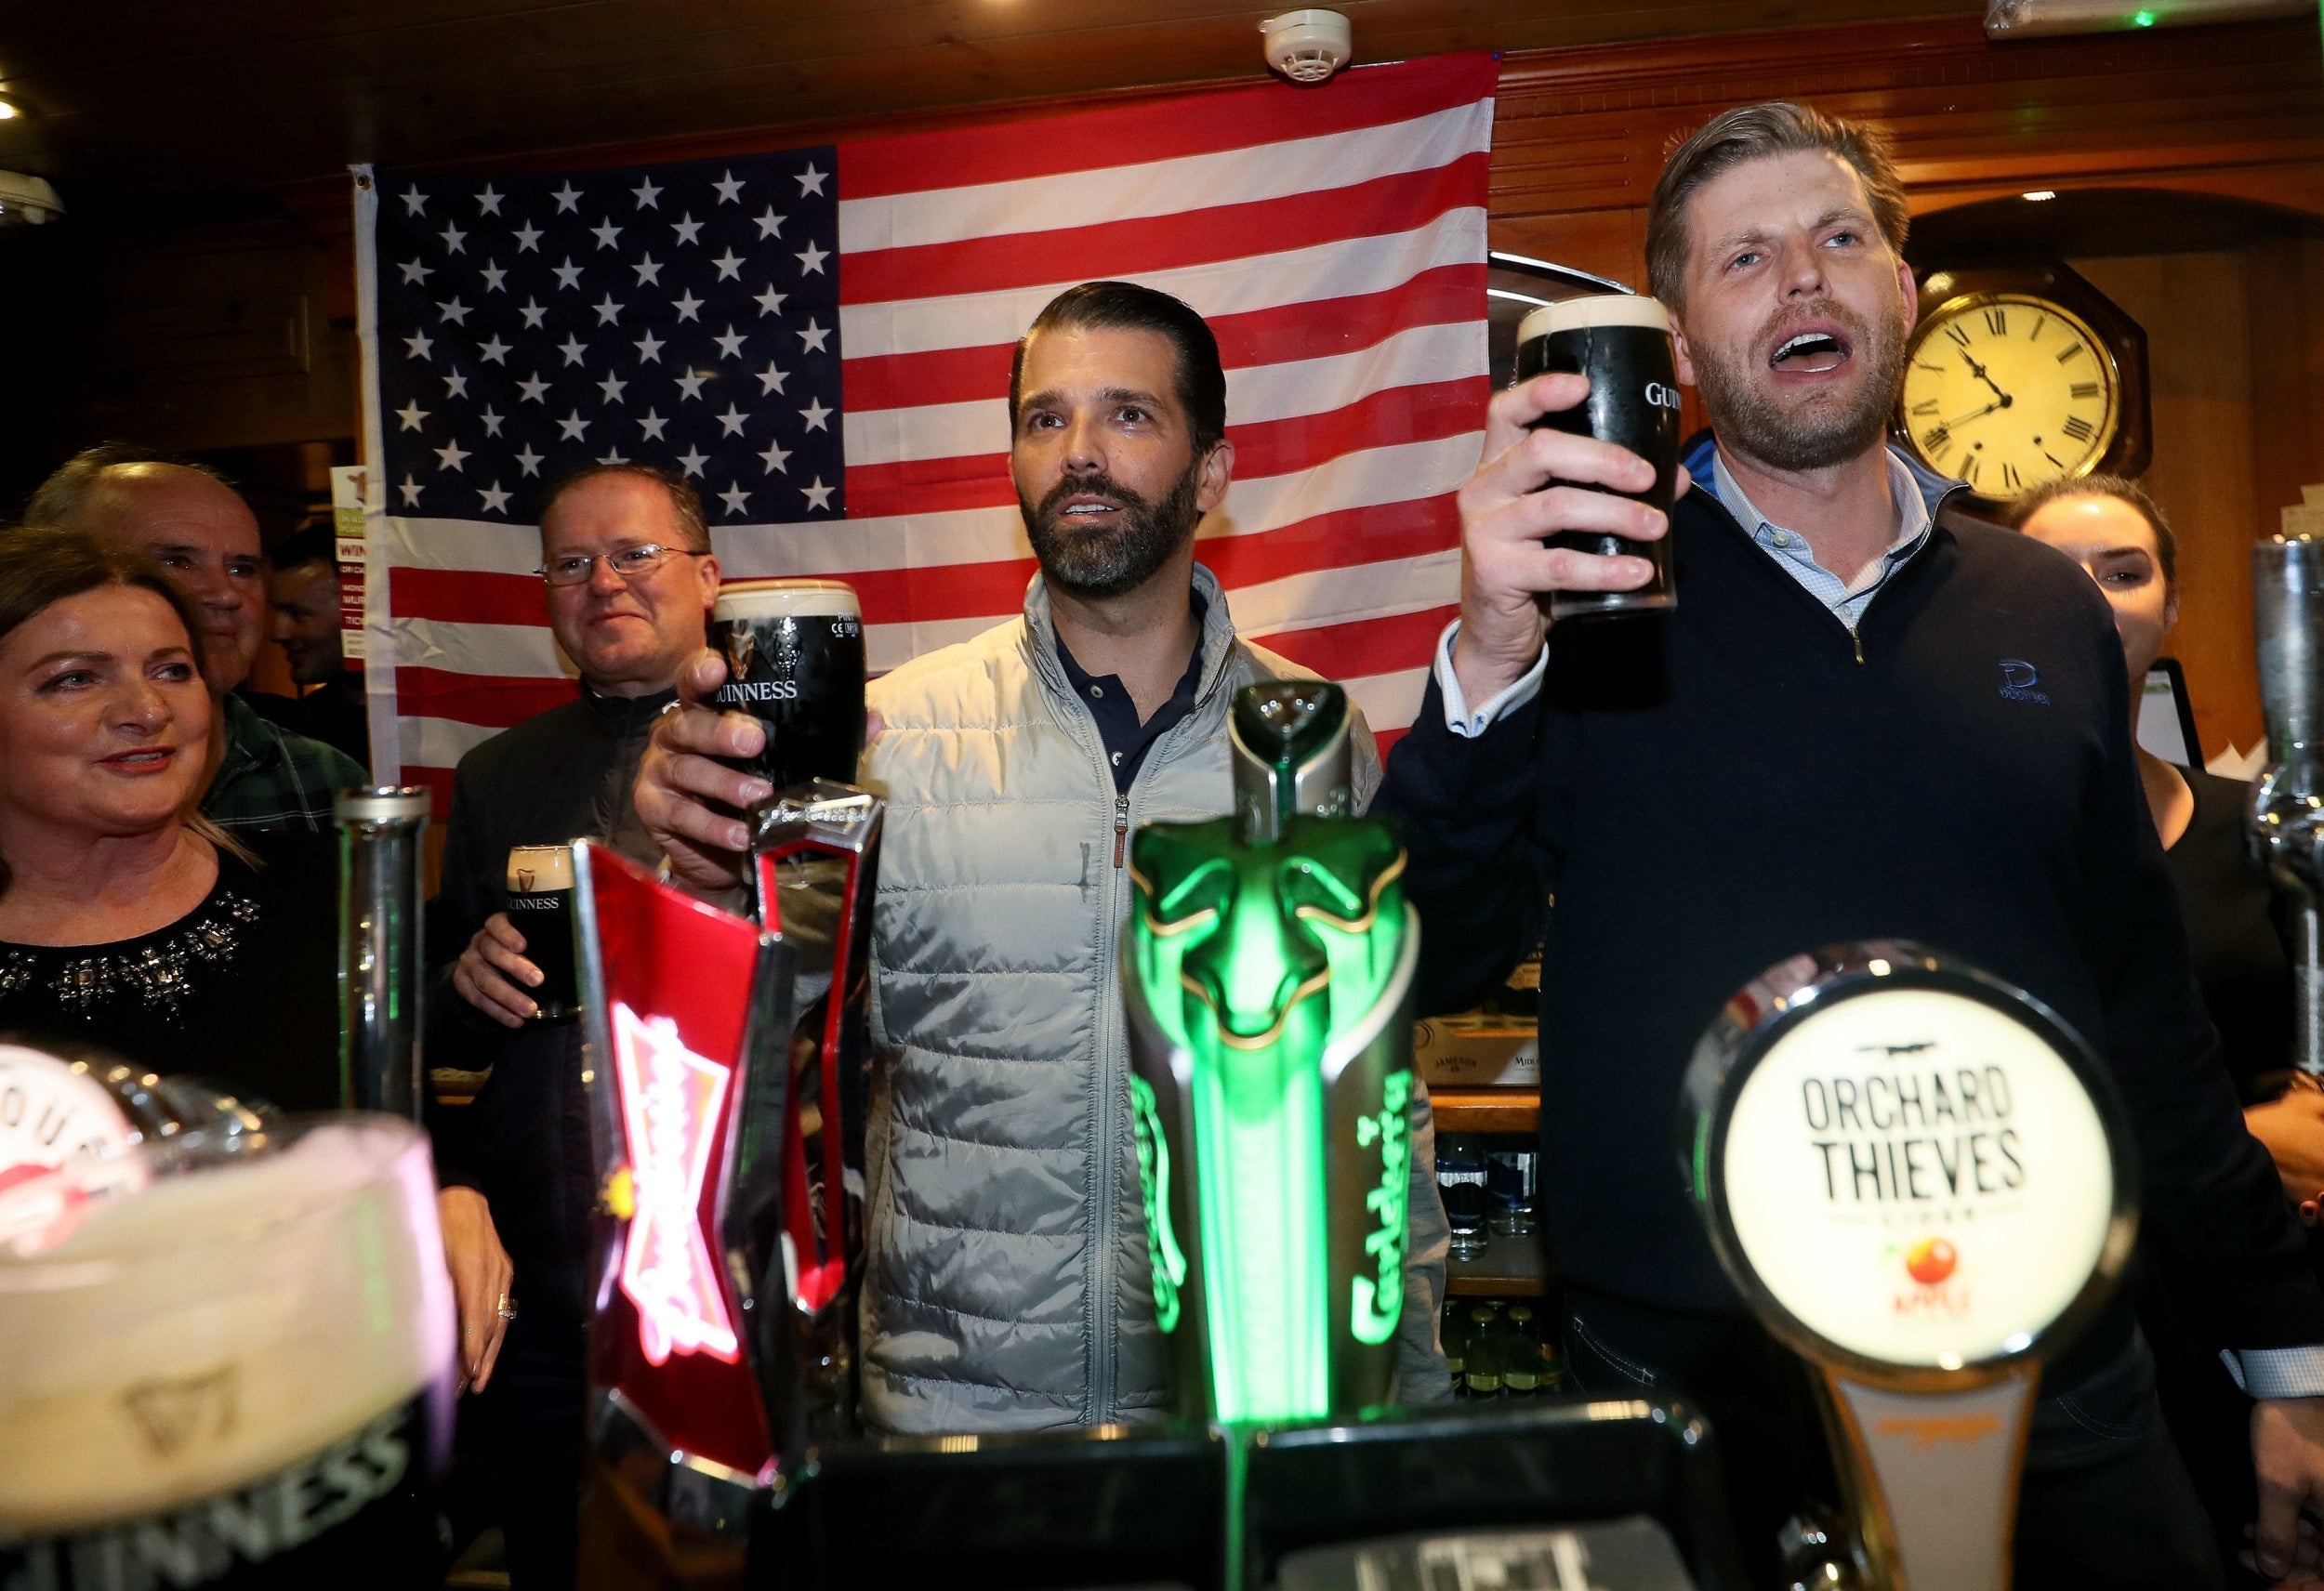 Donald Trump Jr and Eric Trump were spotted drinking with locals in an Irish village close to a Trump branded golf course